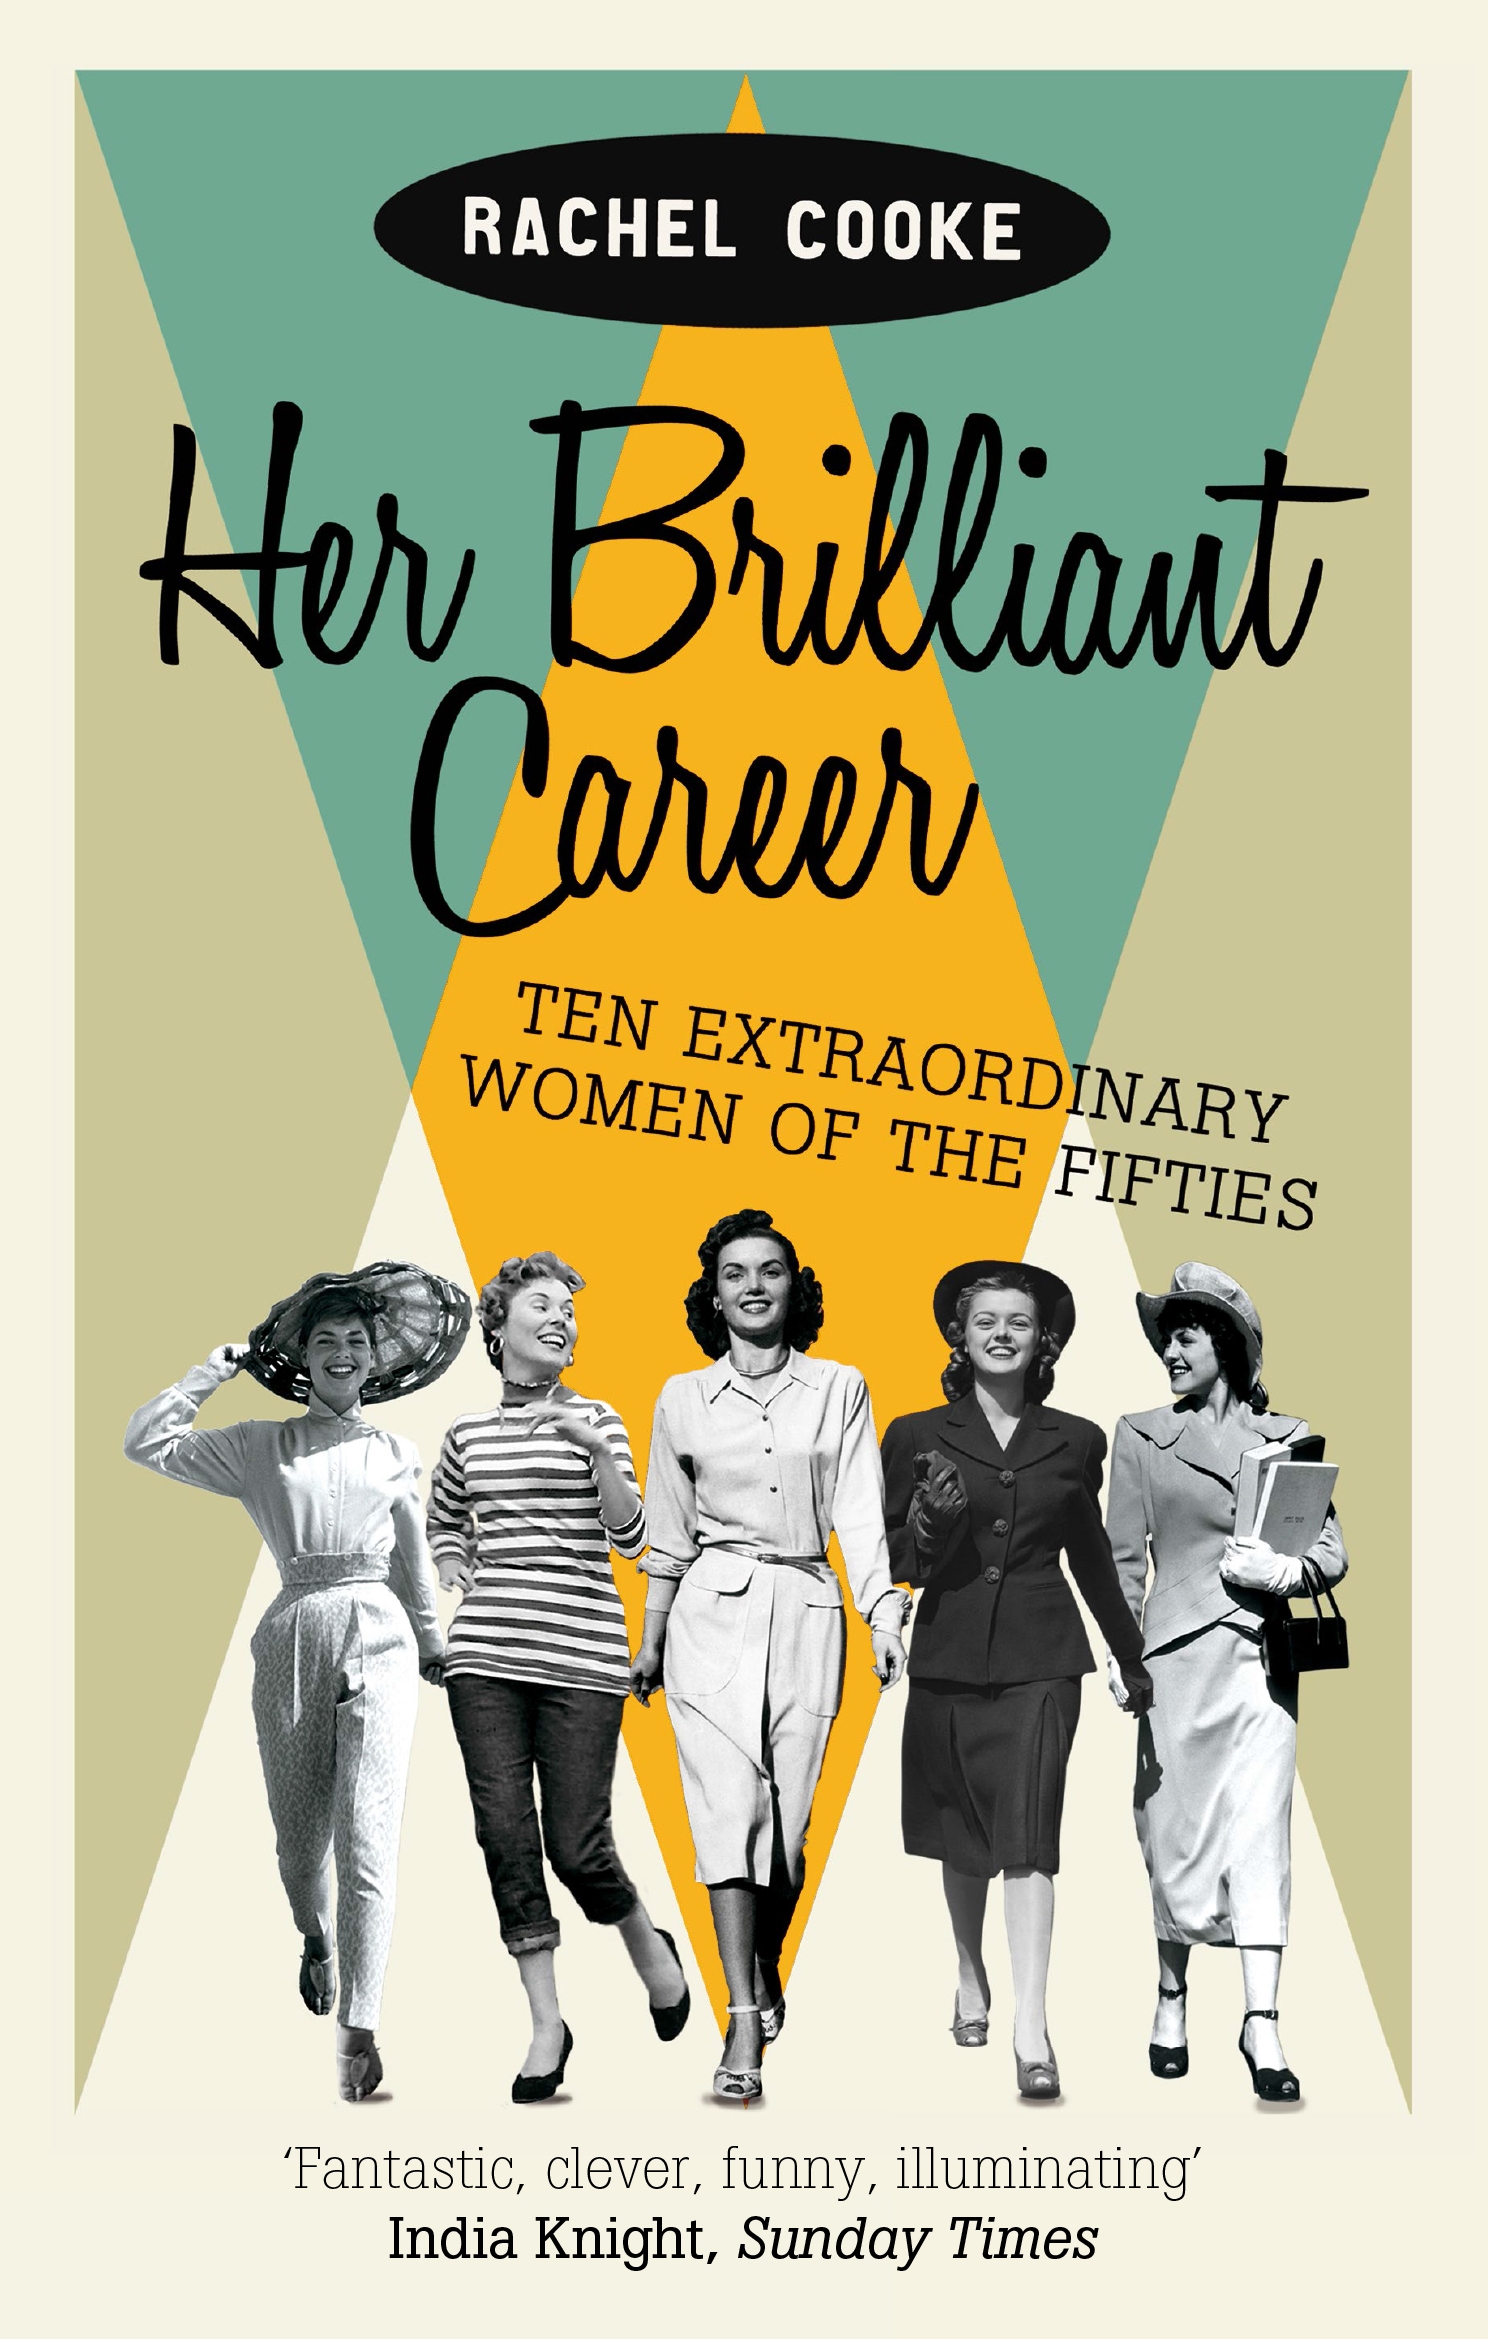 RETURN TO THE 1950S: Rachel Cooke’s ‘Her Brilliant Career’ and the novels of Mary Renault and Barbara Pym